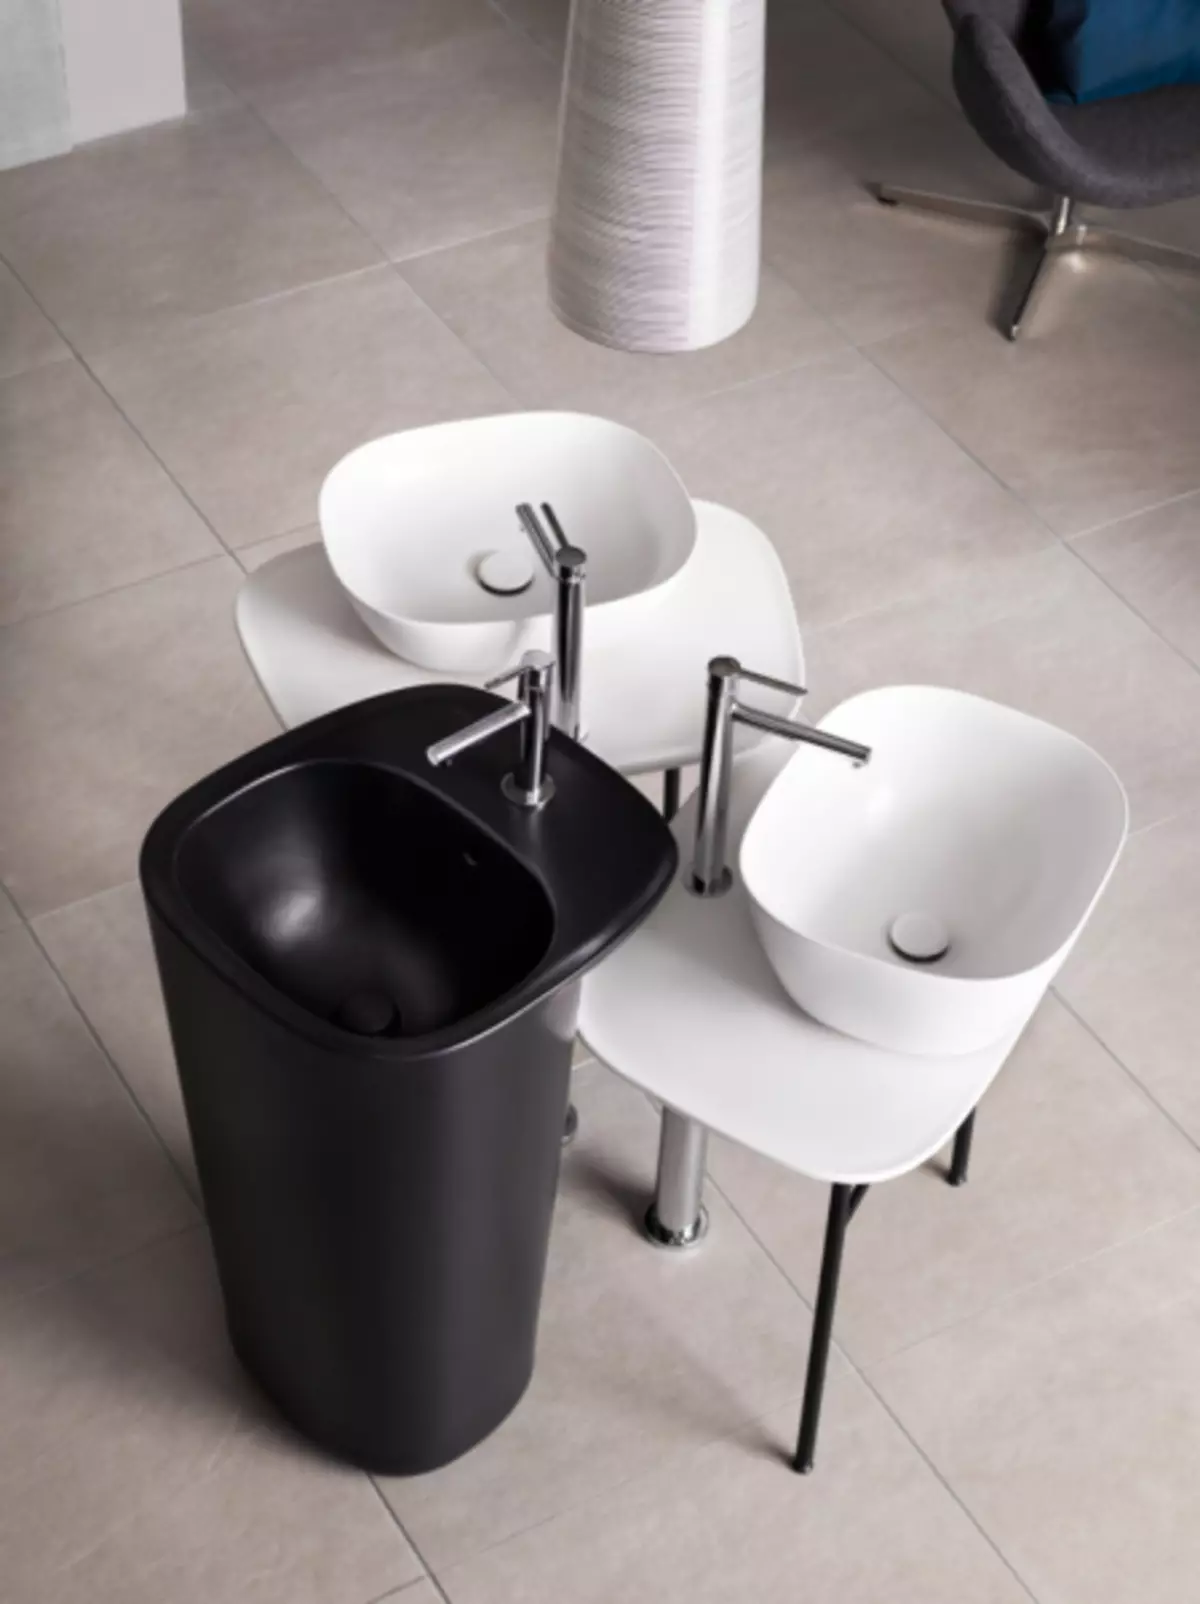 NEW Plumbing - 2019: Faucets, Sinks and Toilets of Amazing Design